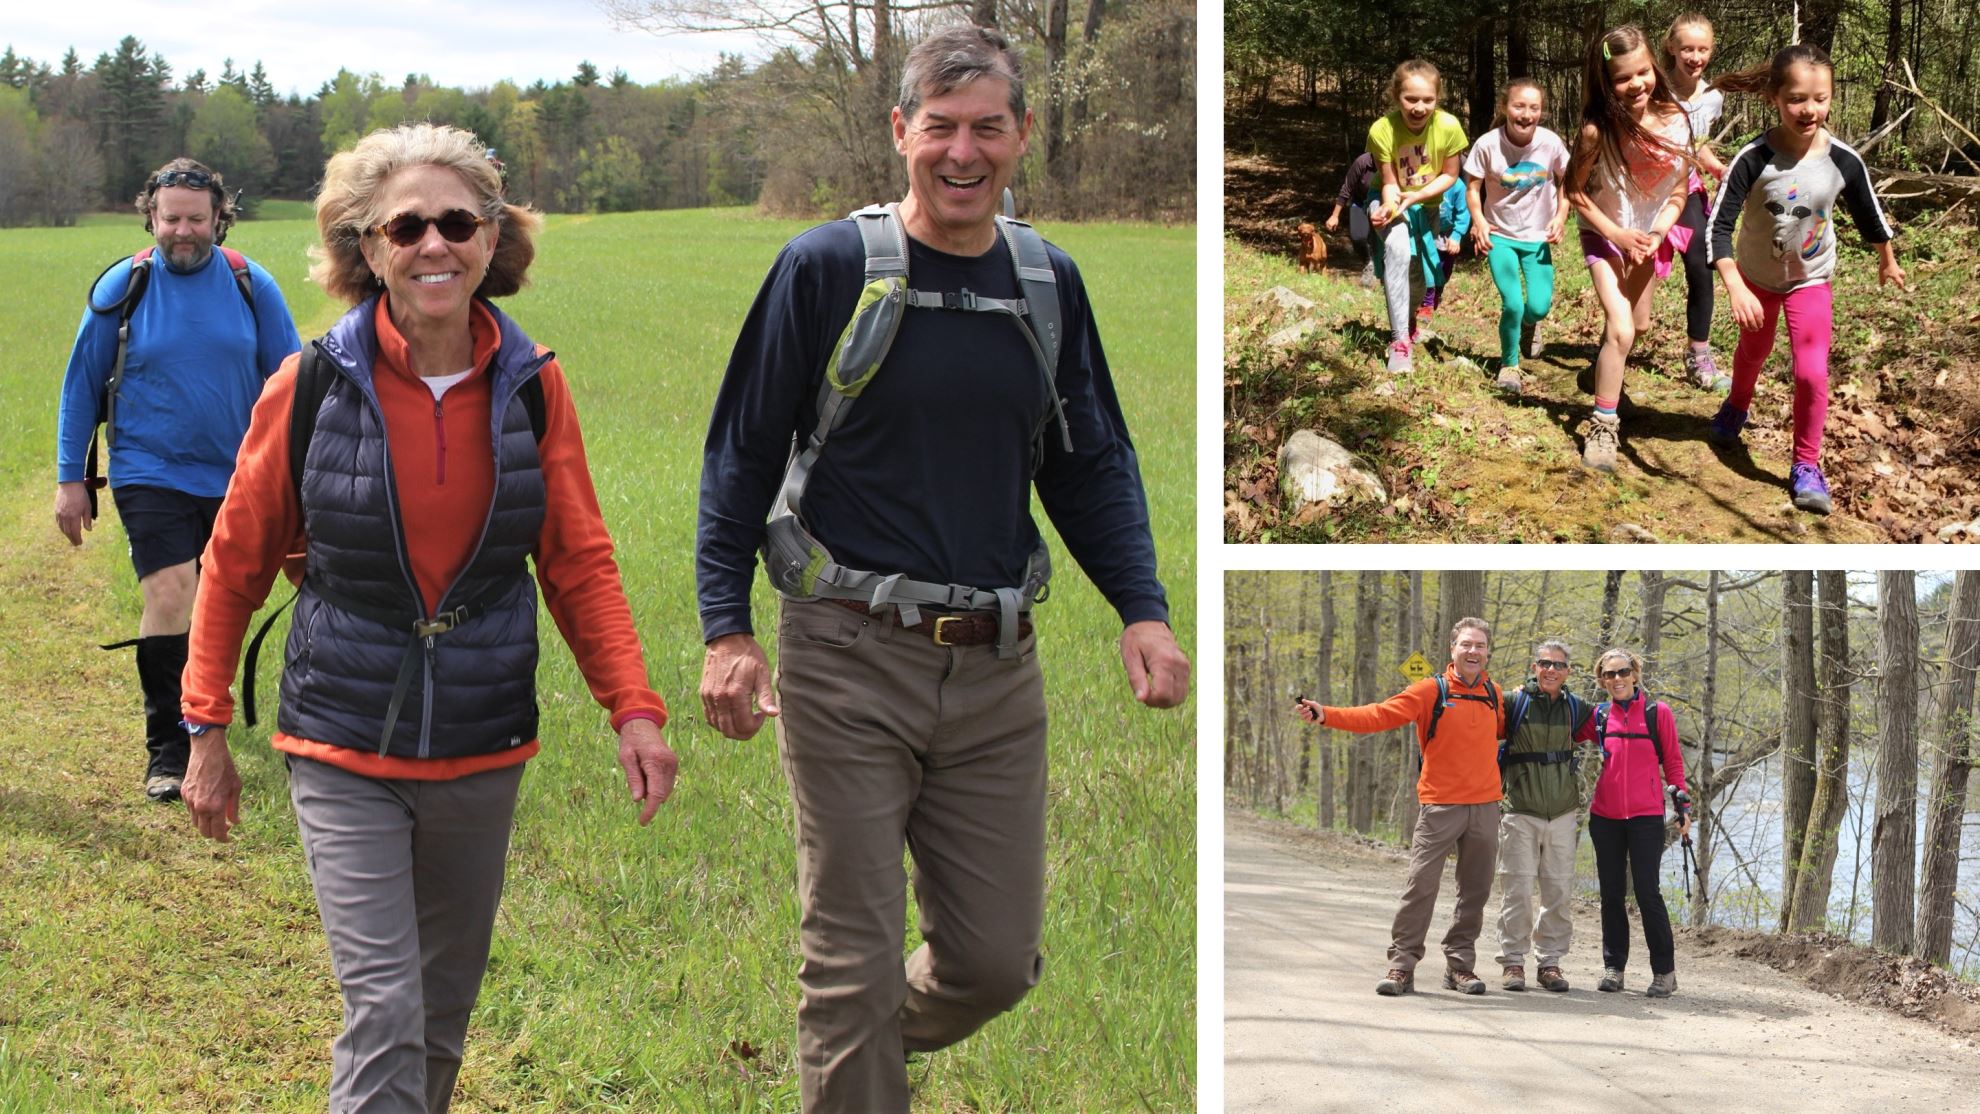 Champlain Area Trails Invites Community to Join the Grand Hike on May 11t